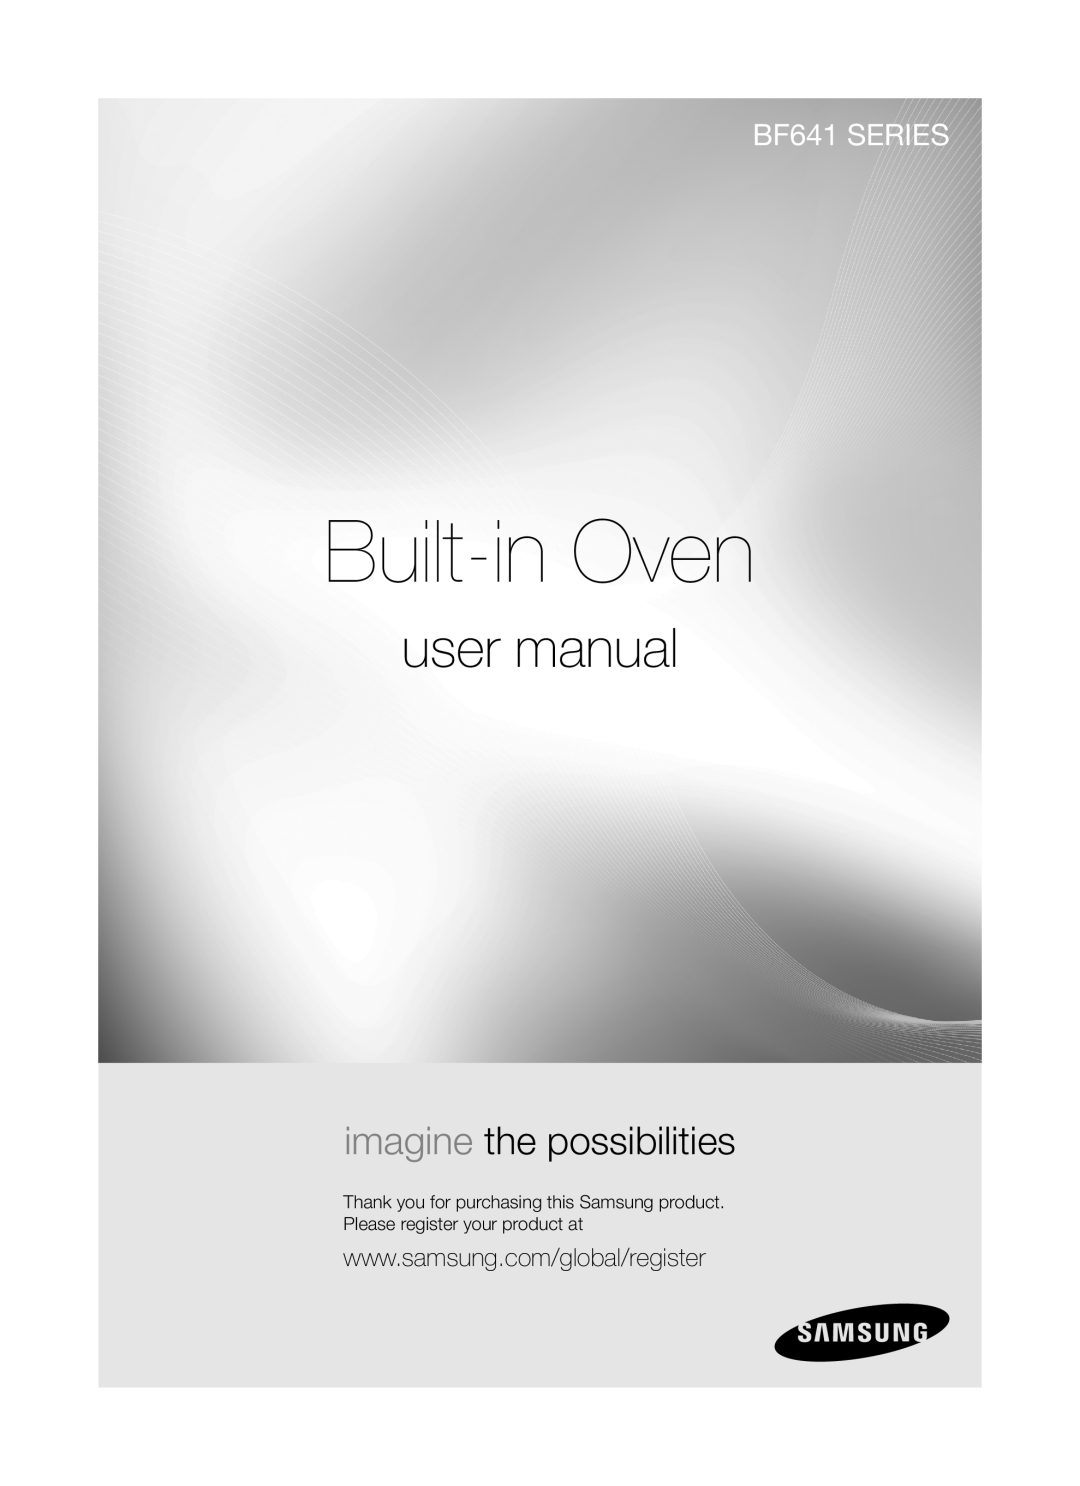 Samsung BF641 Series user manual Built-inOven, imagine the possibilities, BF641 SERIES 